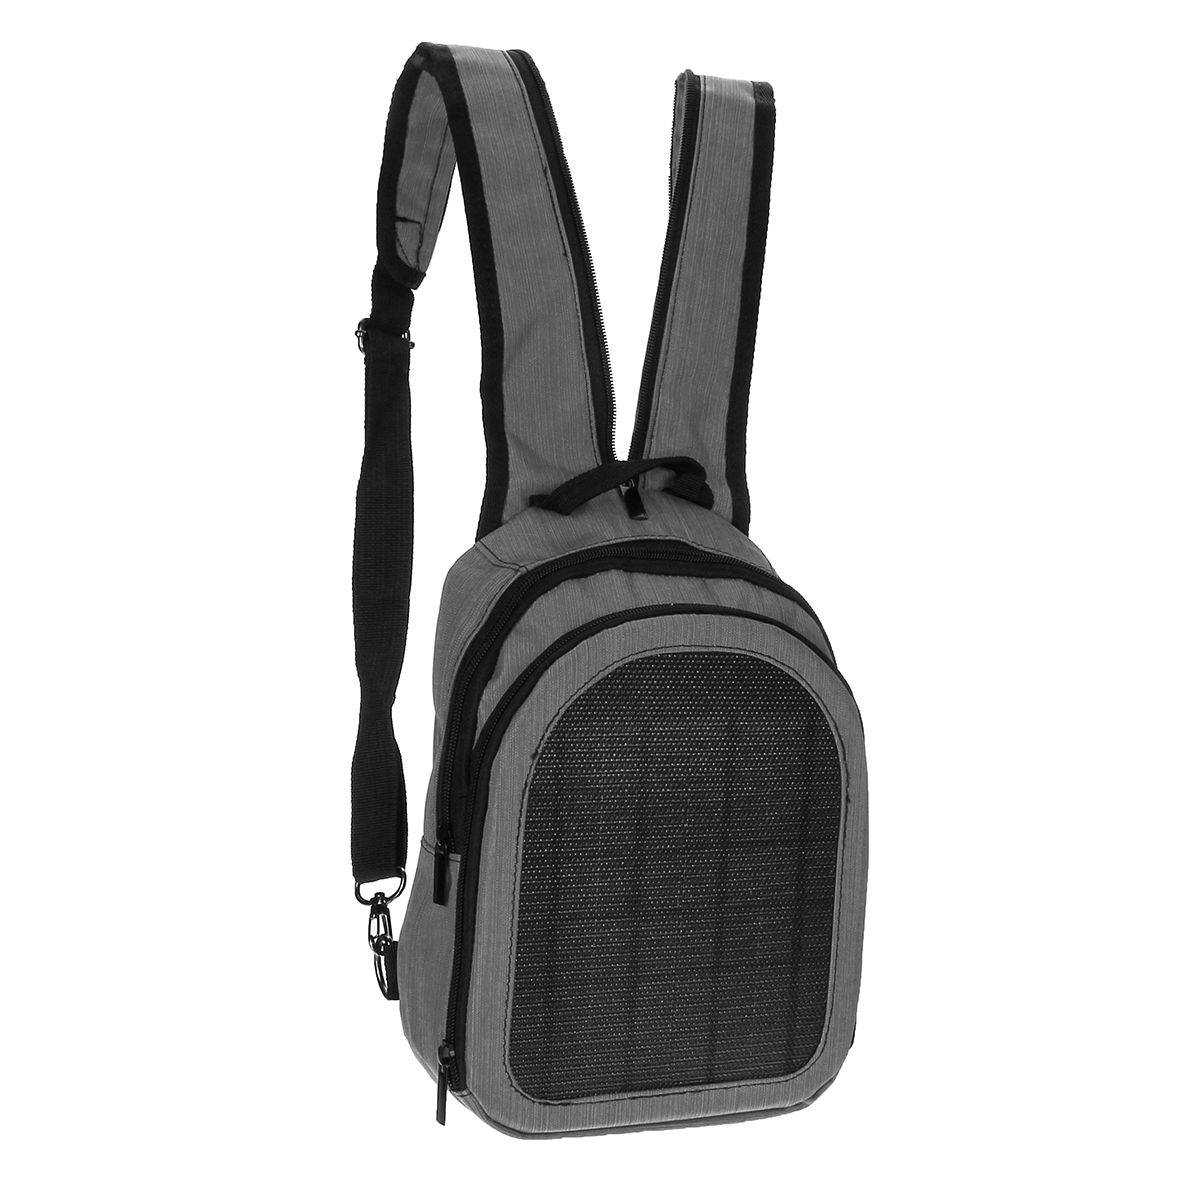 Solar Panels Charger USB Waterproof Power Bank Travel Backpack Laptop Notebook